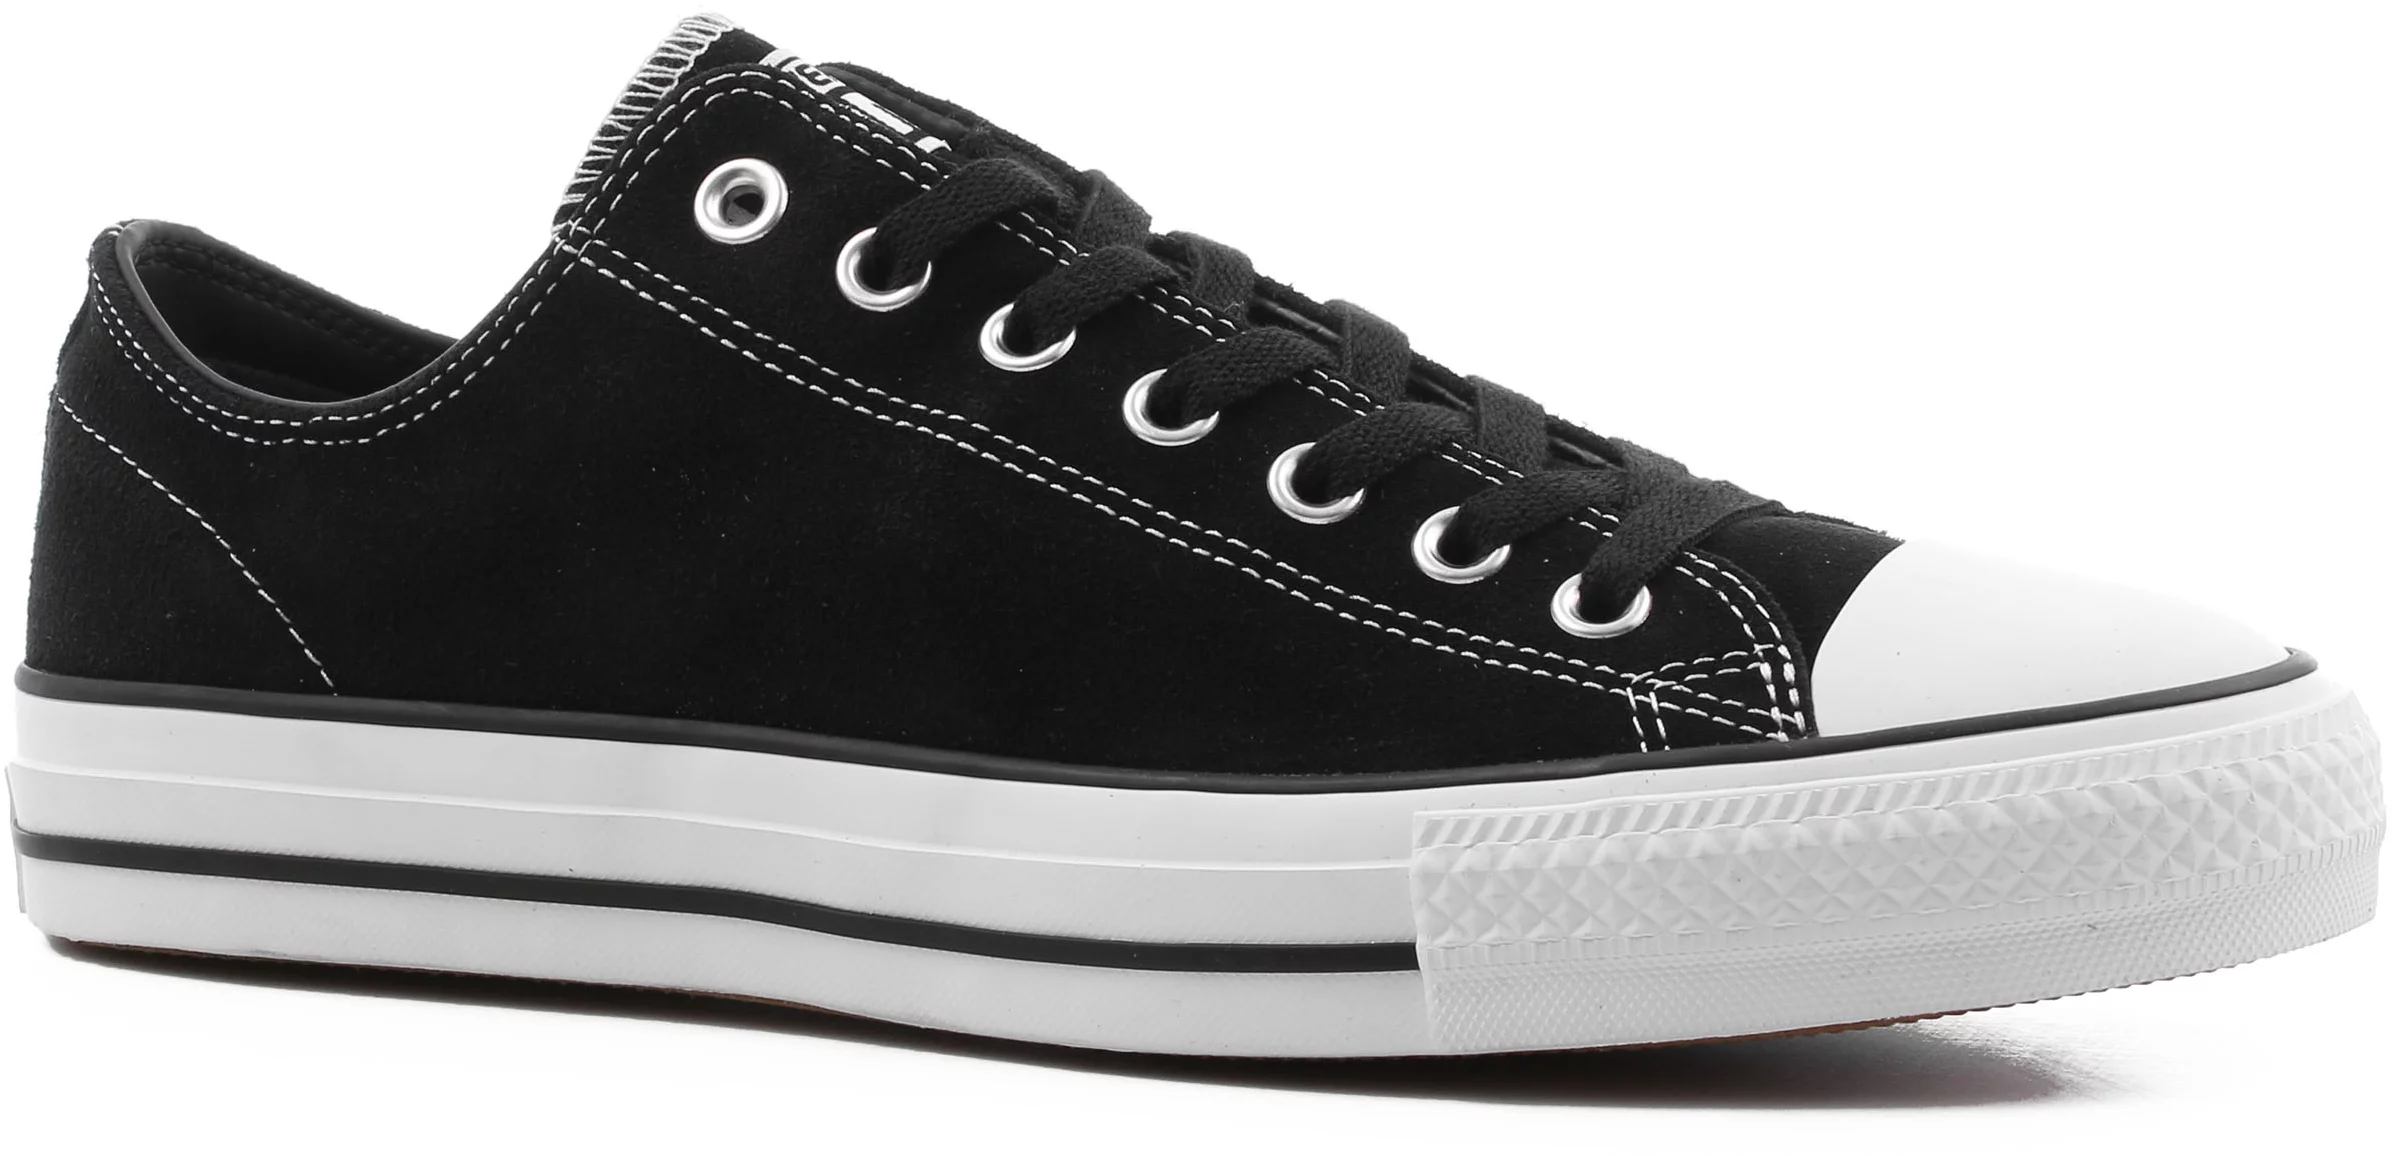 visdom Generalife Reception Converse Chuck Taylor All Star Pro Skate Shoes - (suede) black/black/white  - Free Shipping | Tactics